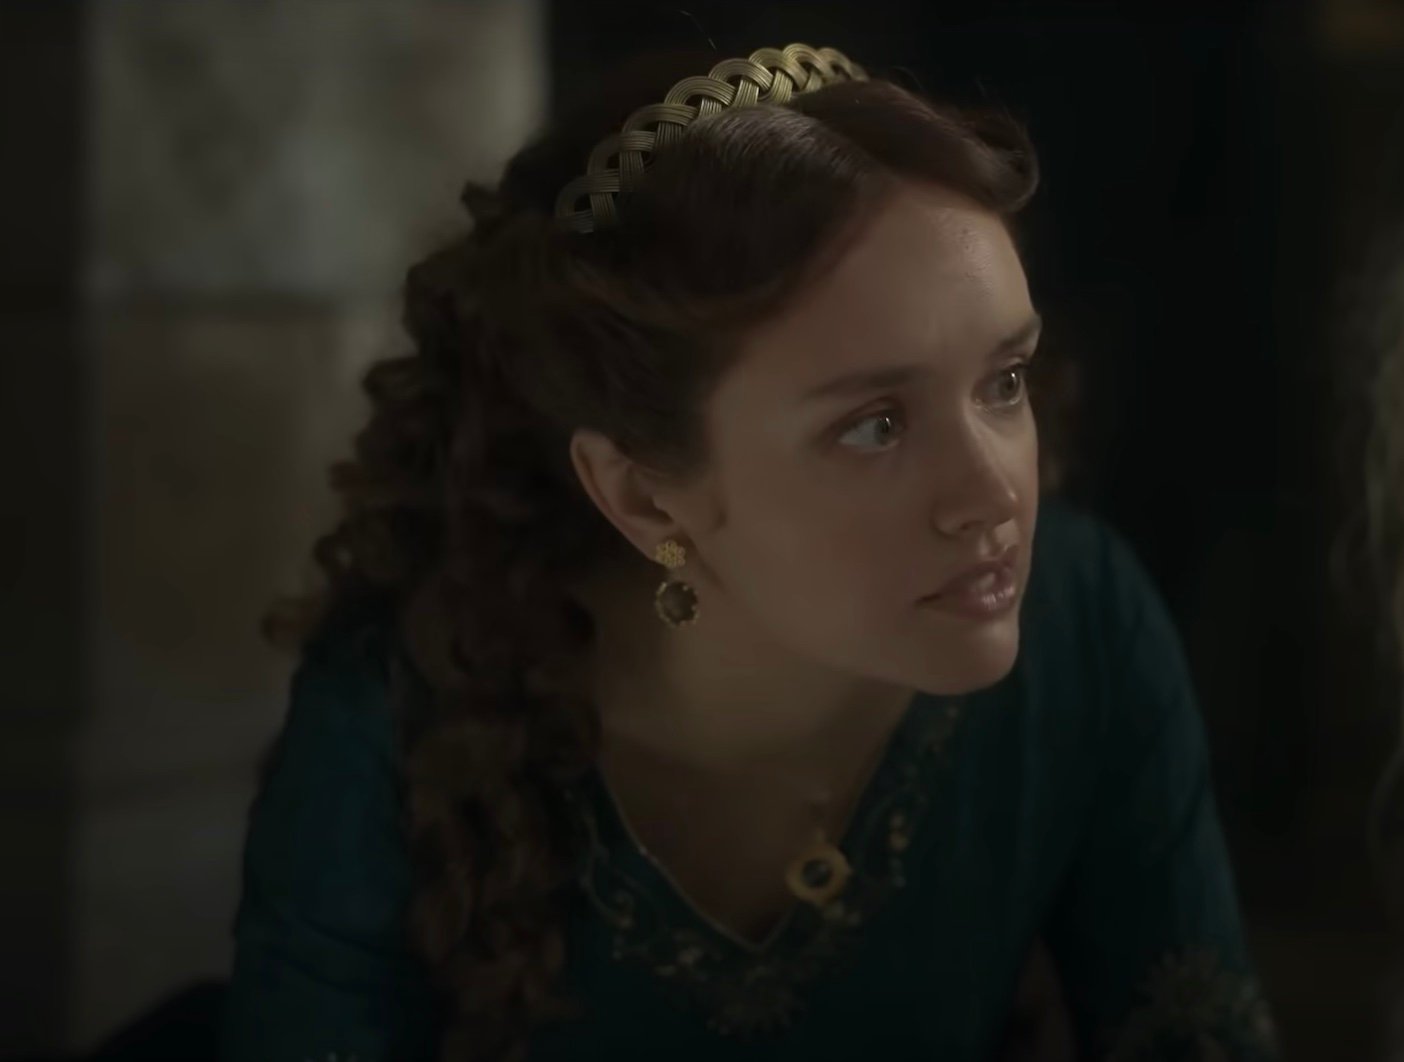 Olivia Cooke, the ‘House Of The Dragon” star, is unrecognizable from her breakout role in the most recent Gen X movie of the last 10 years